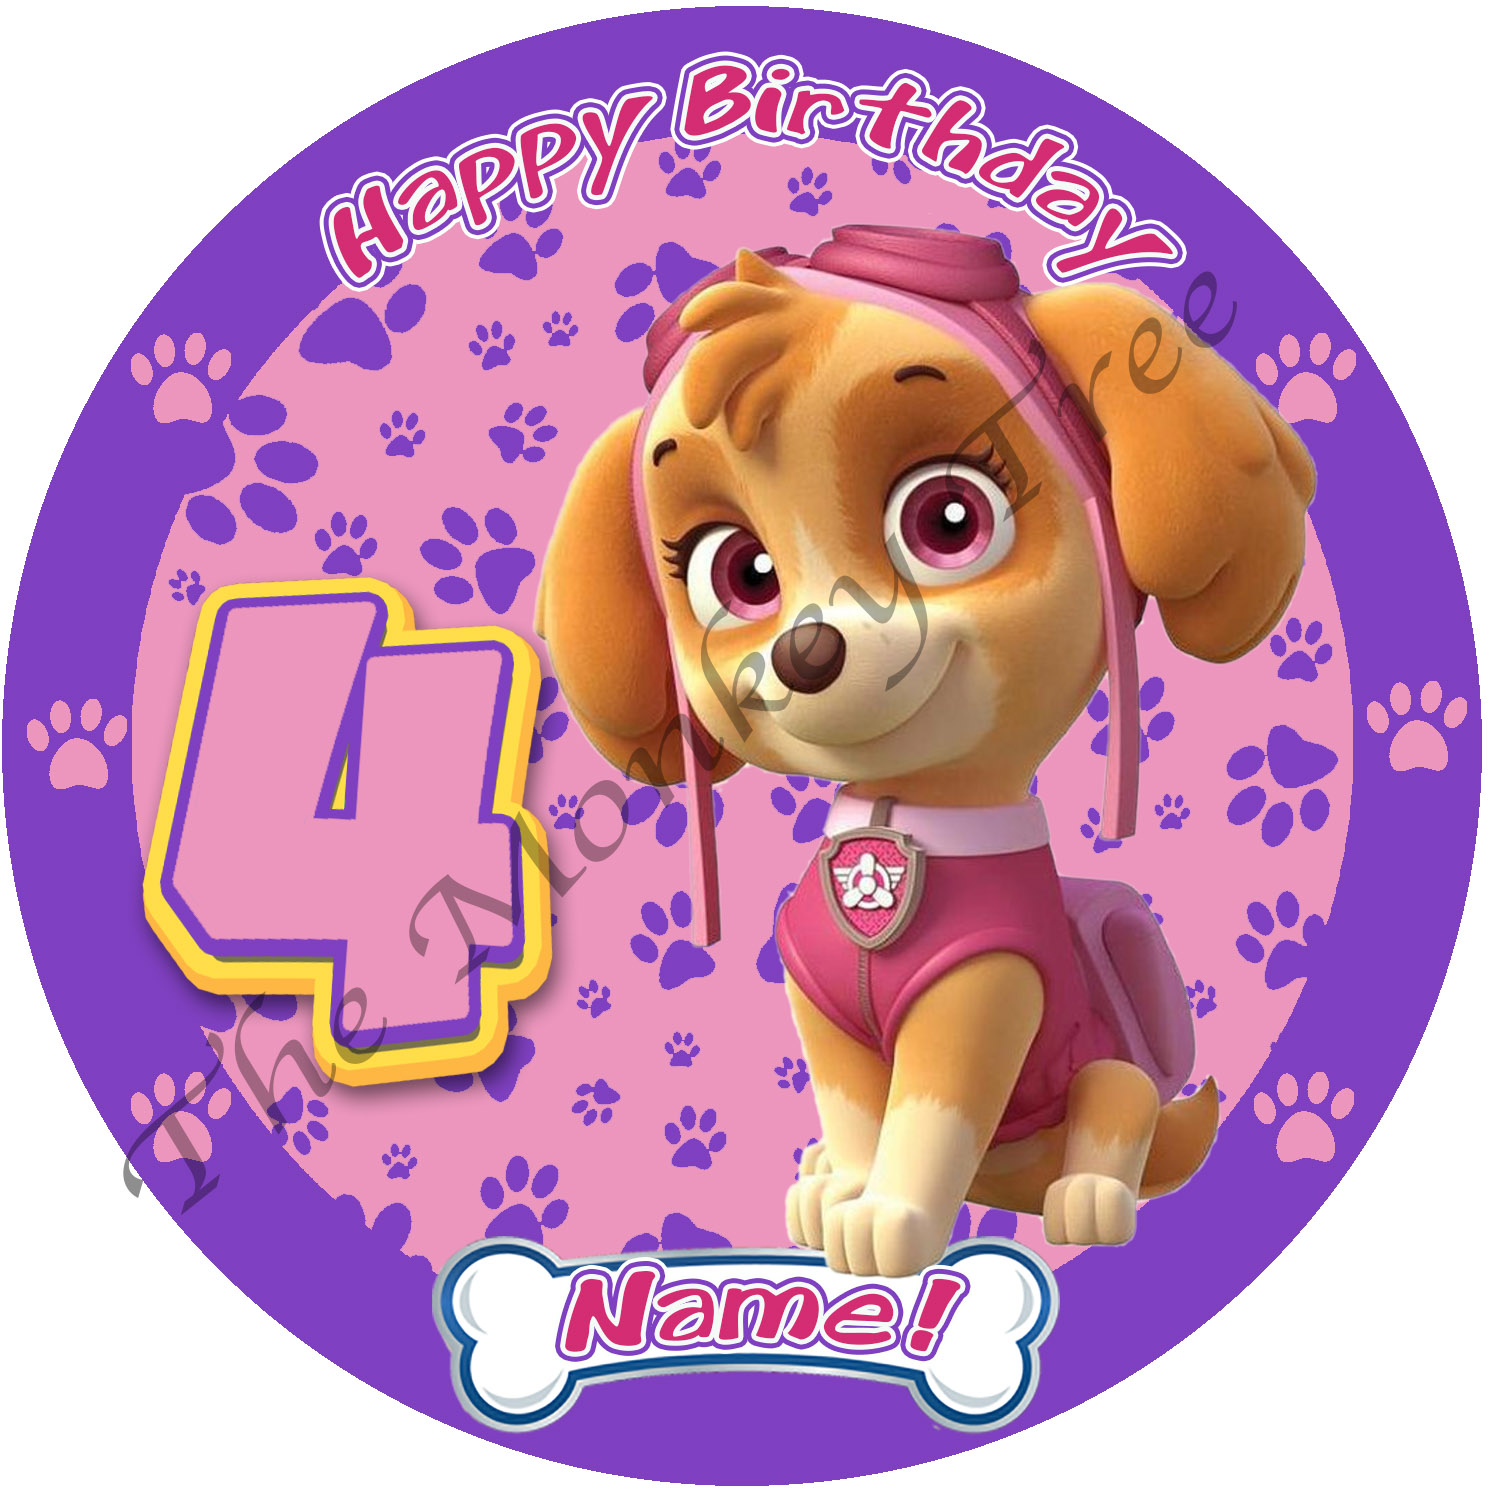 SKYE AND EVEREST Paw patrol Edible cake topper image Party 